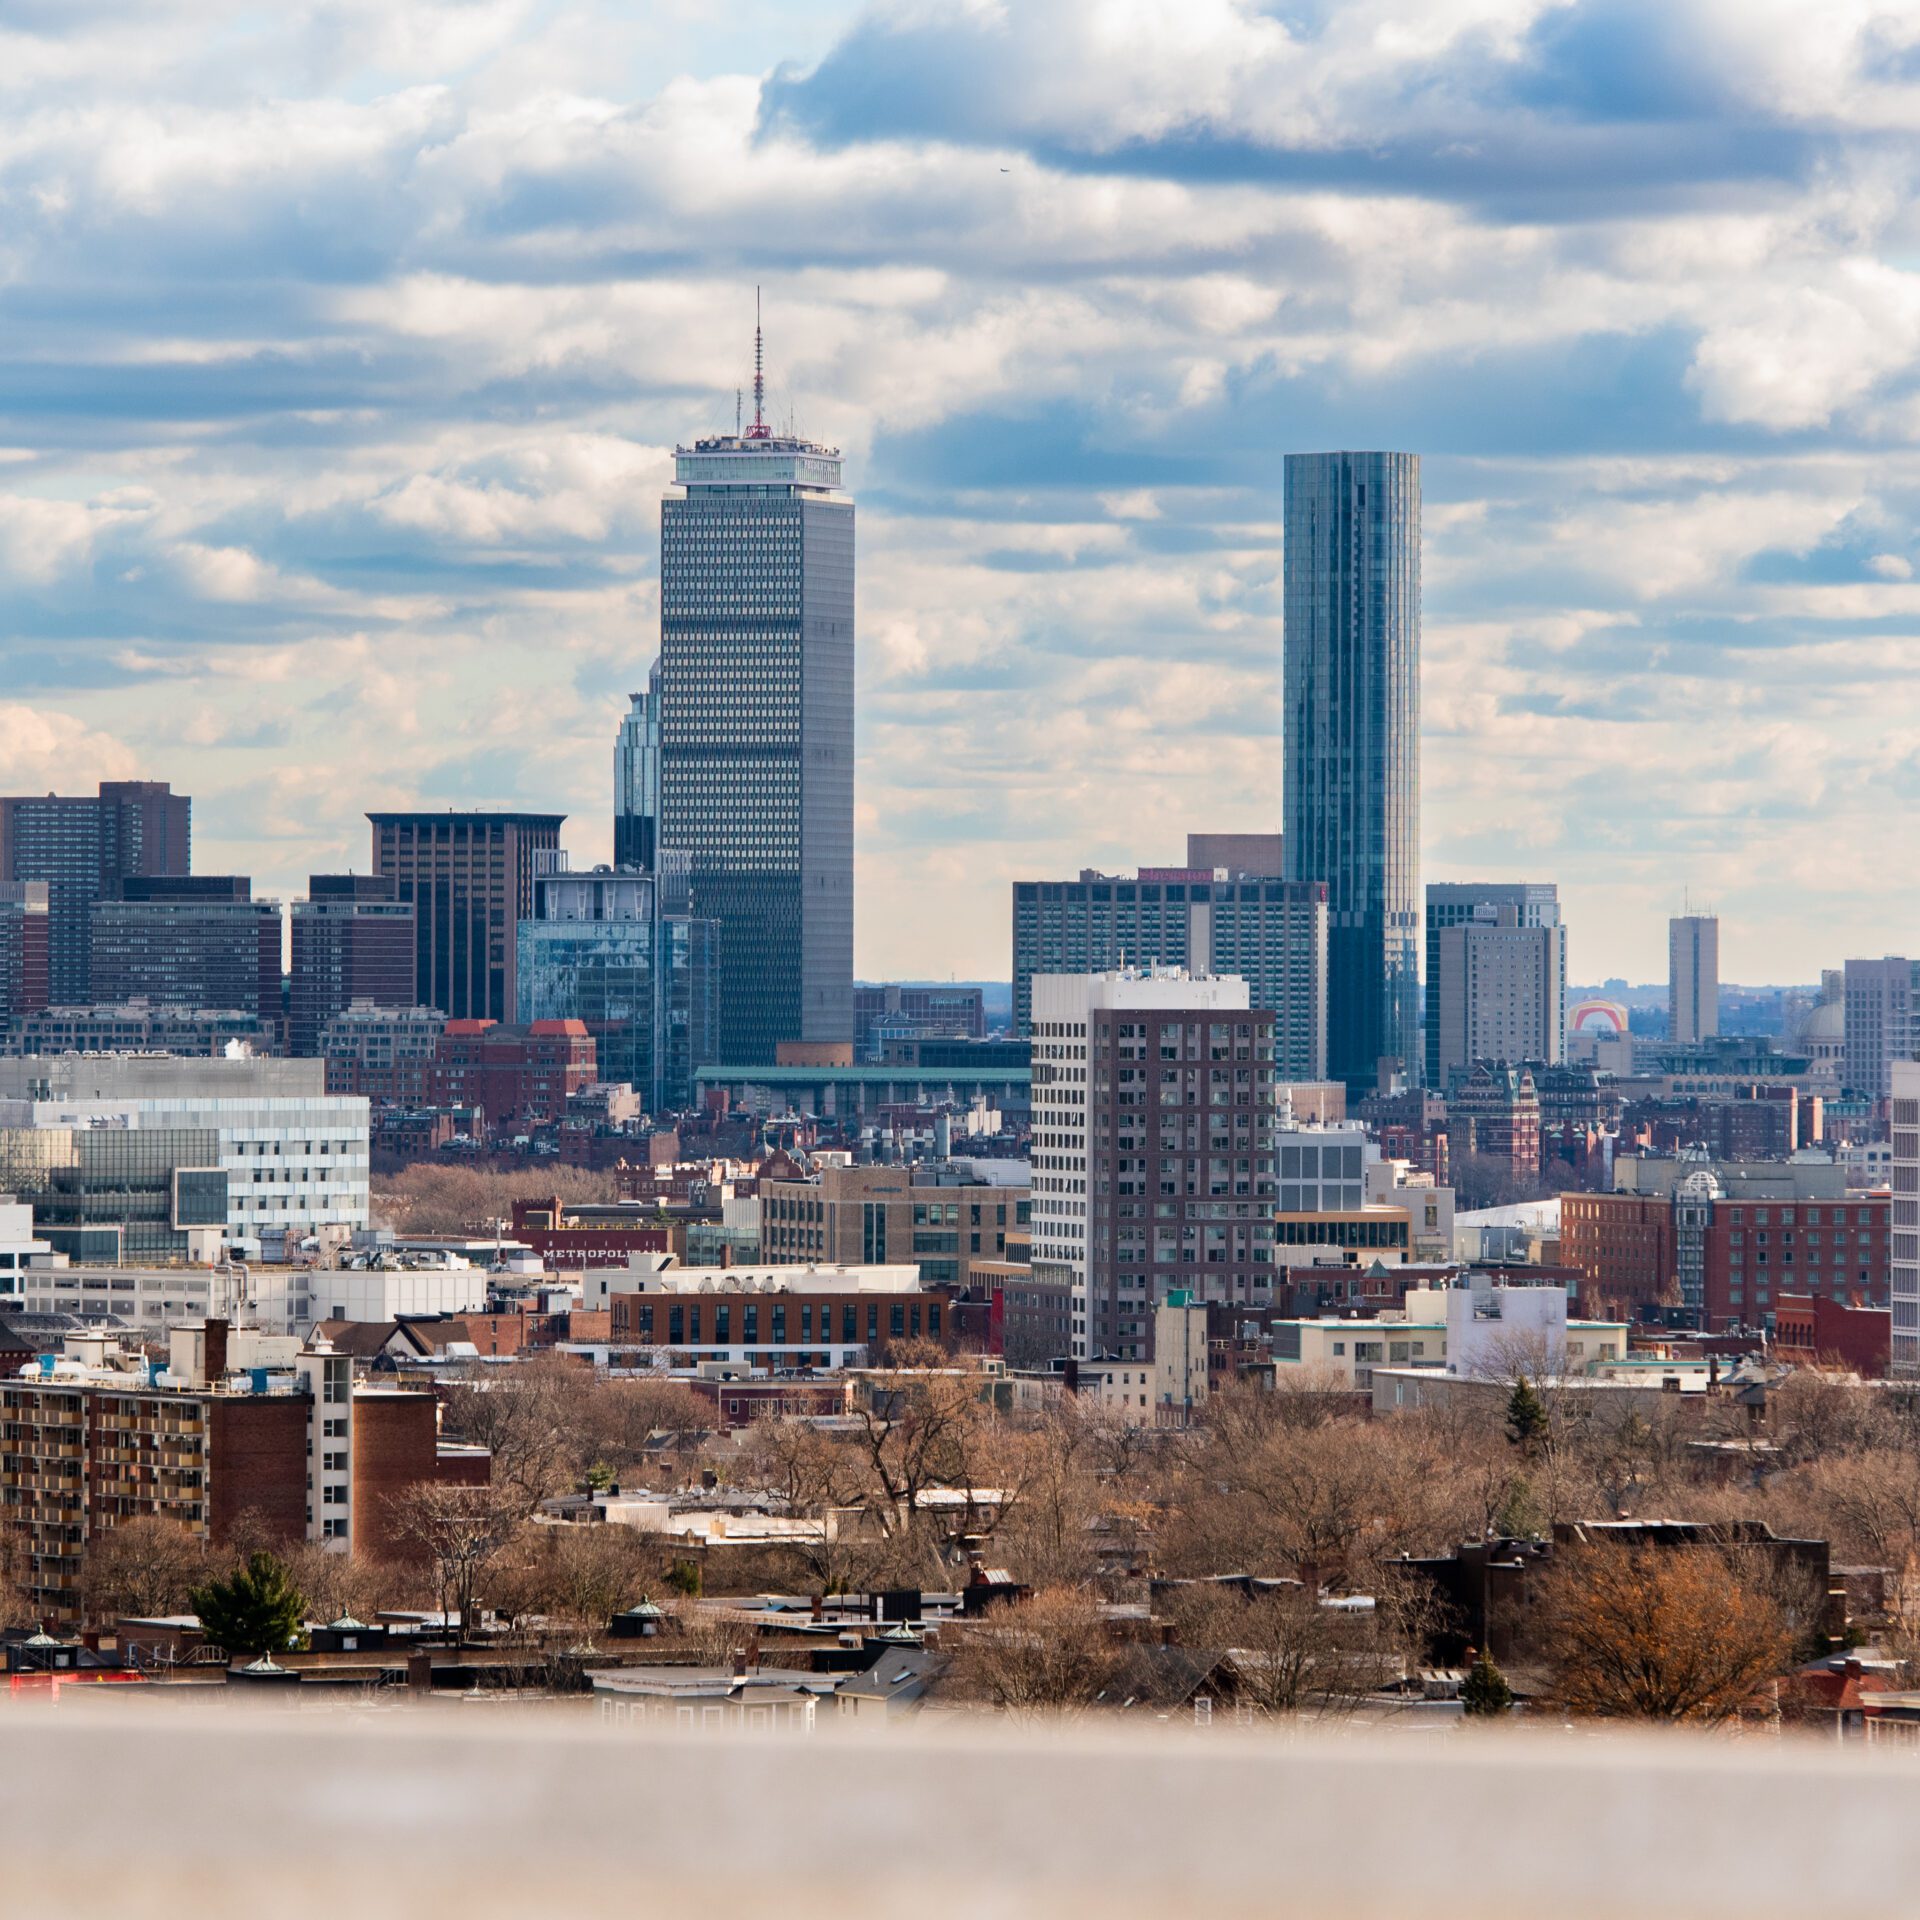 A Boston city skyline featuring the John Hancock Tower and the Prudential Tower.